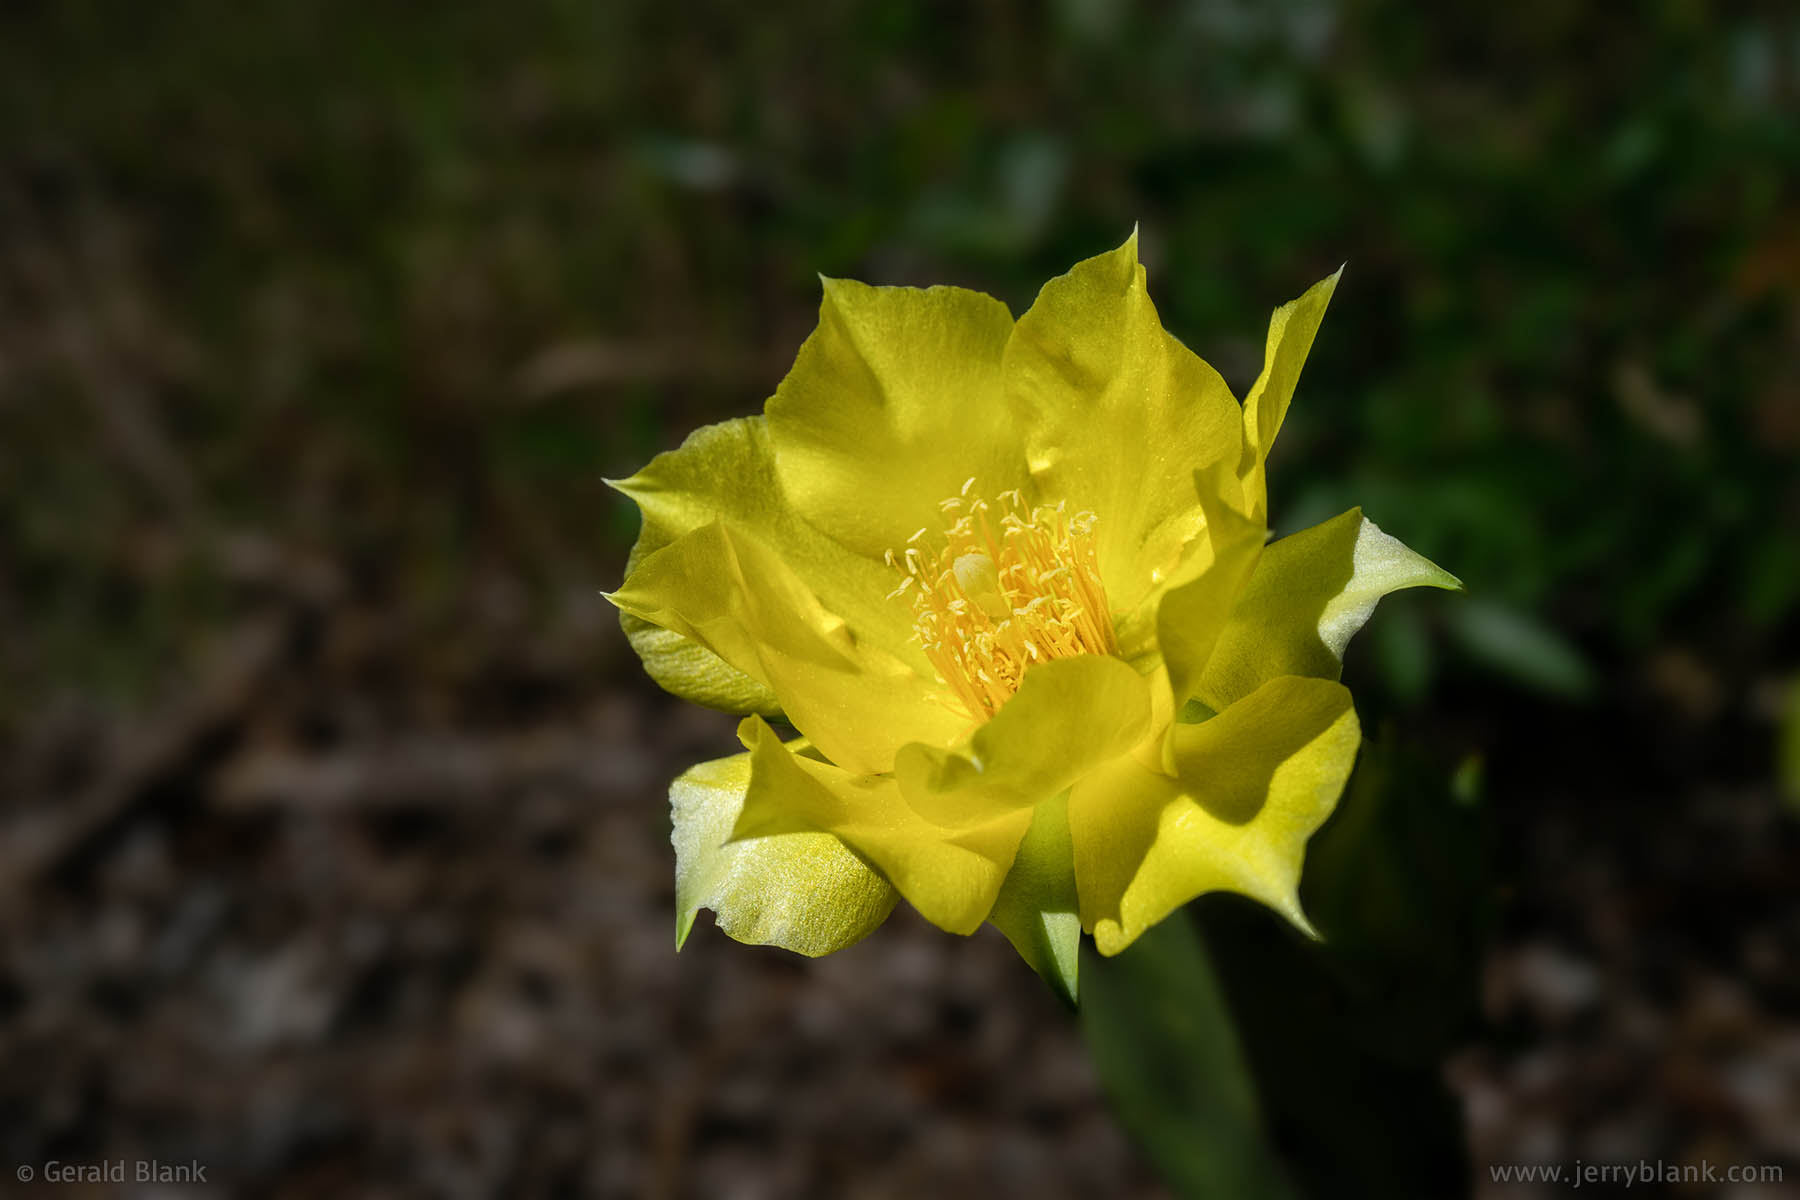 #70030 - Eastern prickly pear cactus (Opuntia humifusa), flowering in the Hills of Minneola, Lake County, FL - photo by Jerry Blank